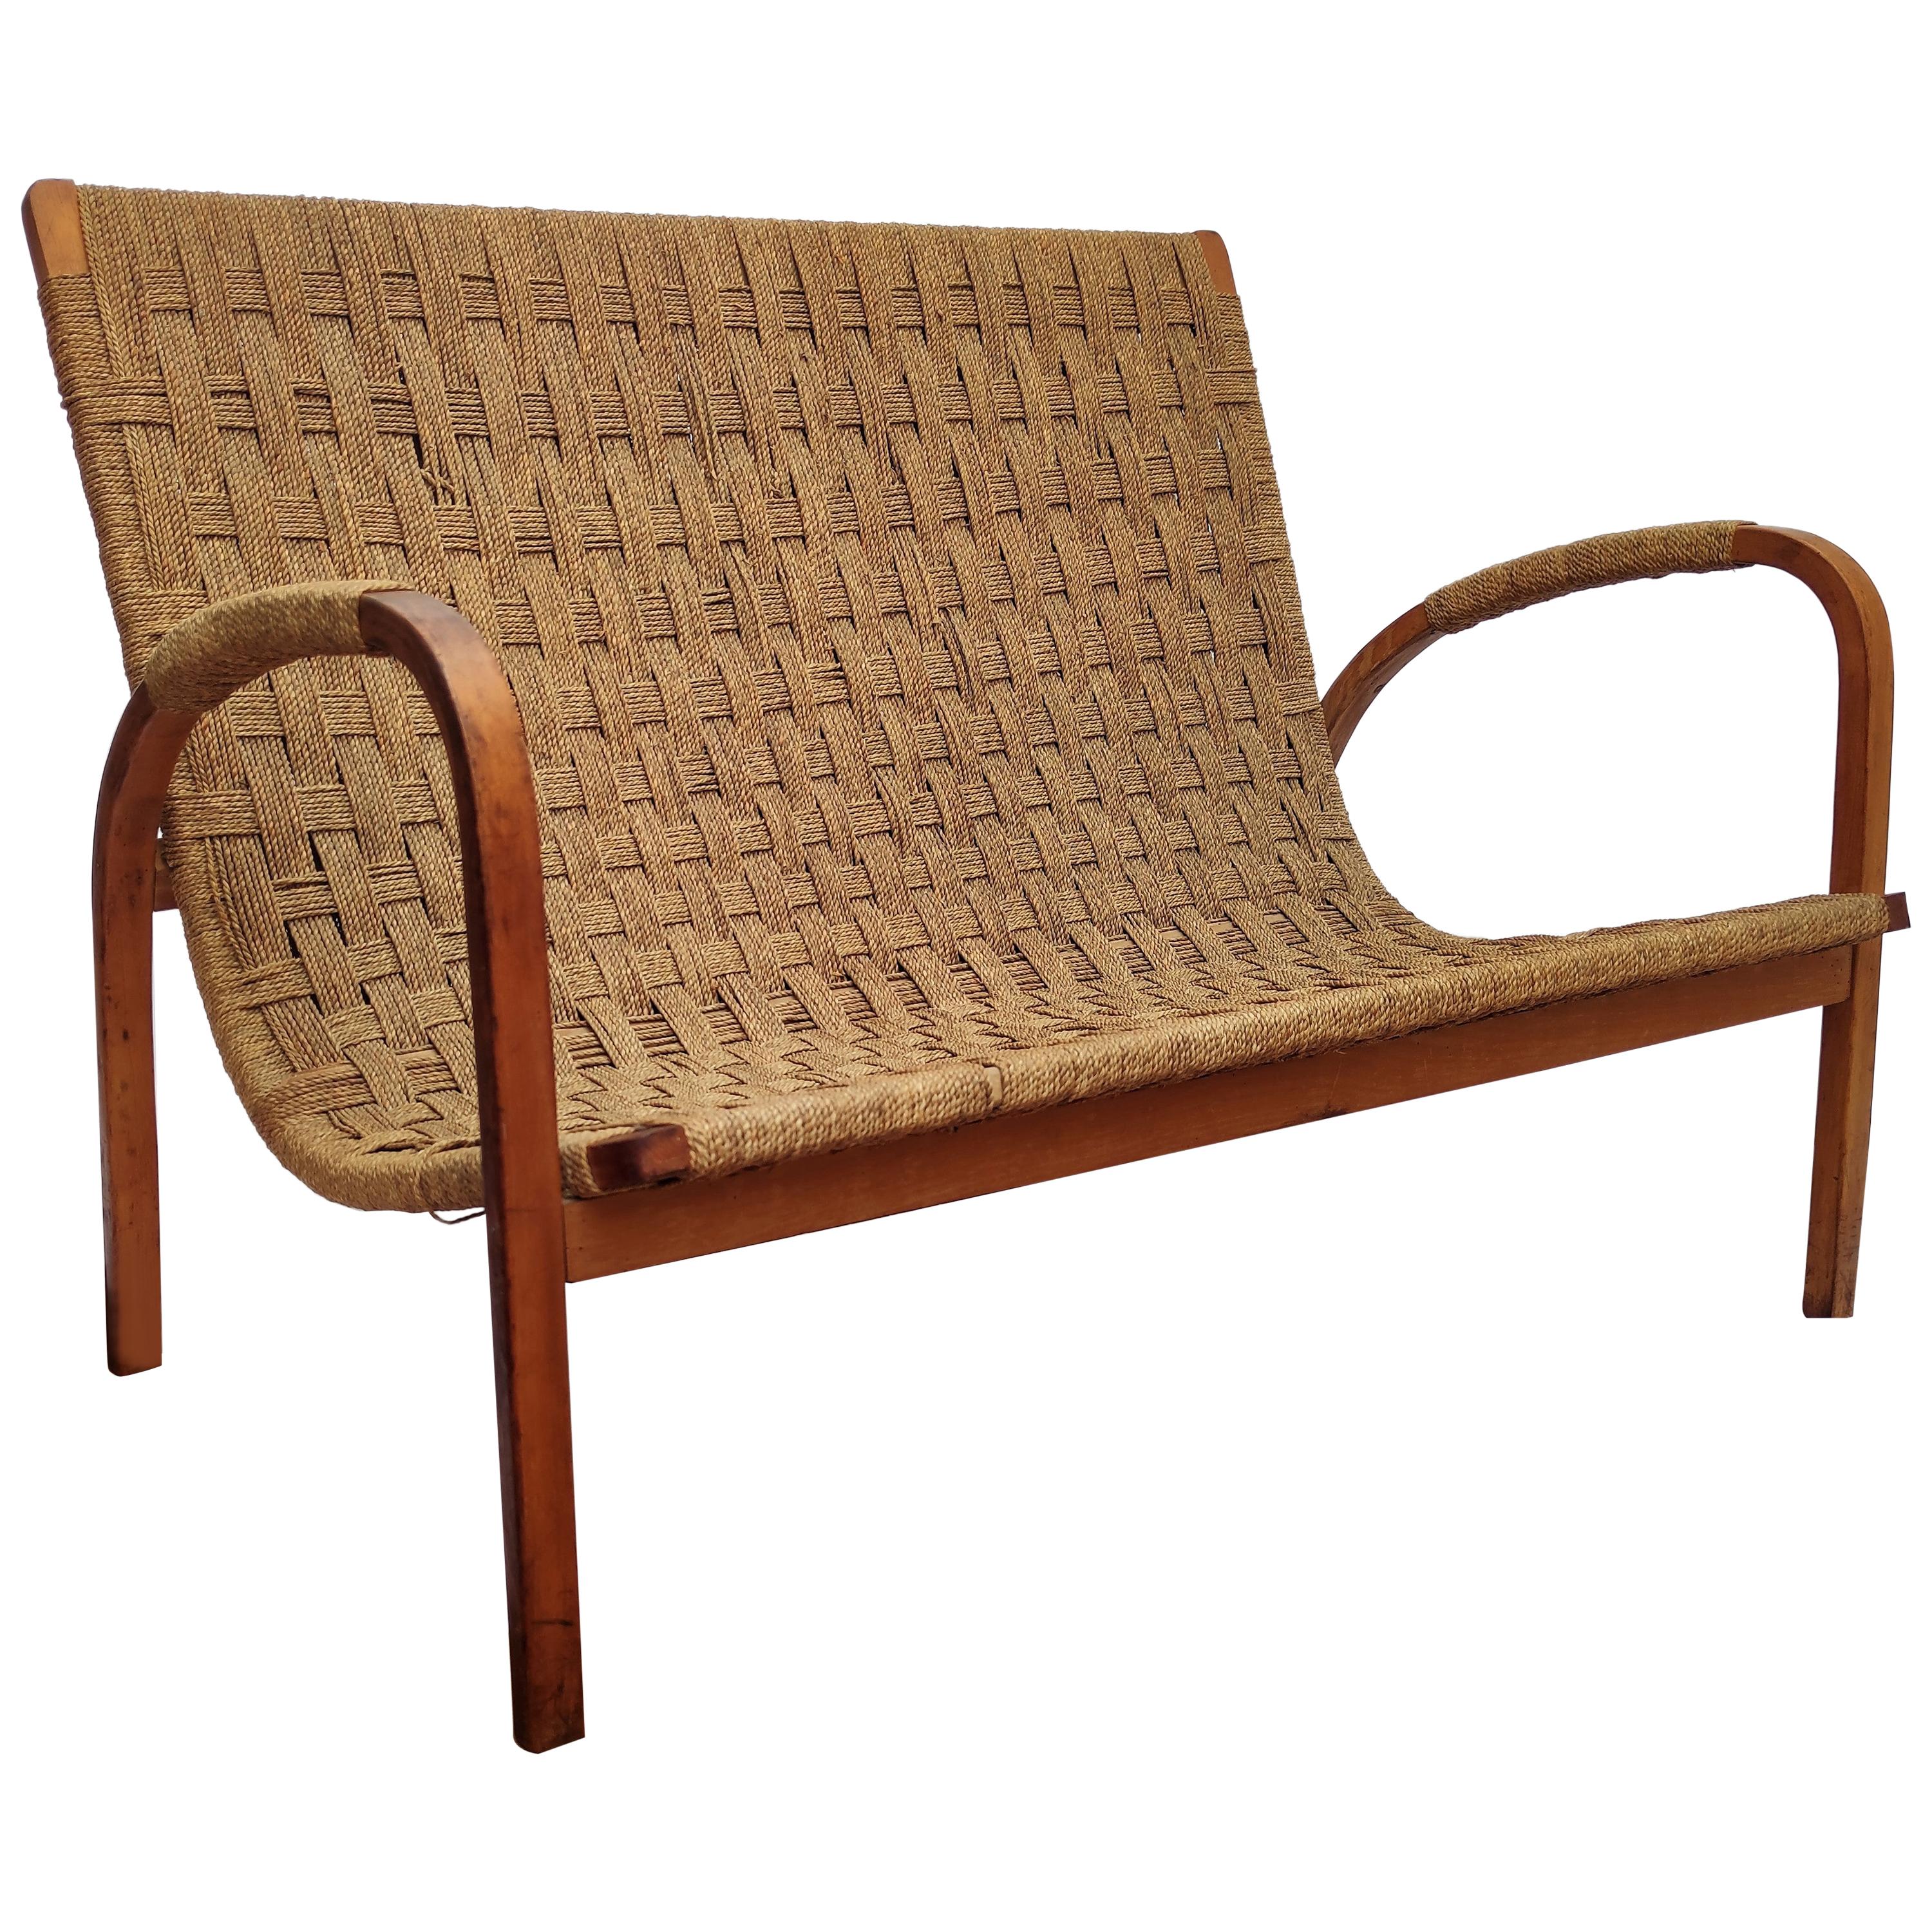 1960s Italian Midcentury Wood and Cord Woven Rope Lounge Bench Armchair For Sale